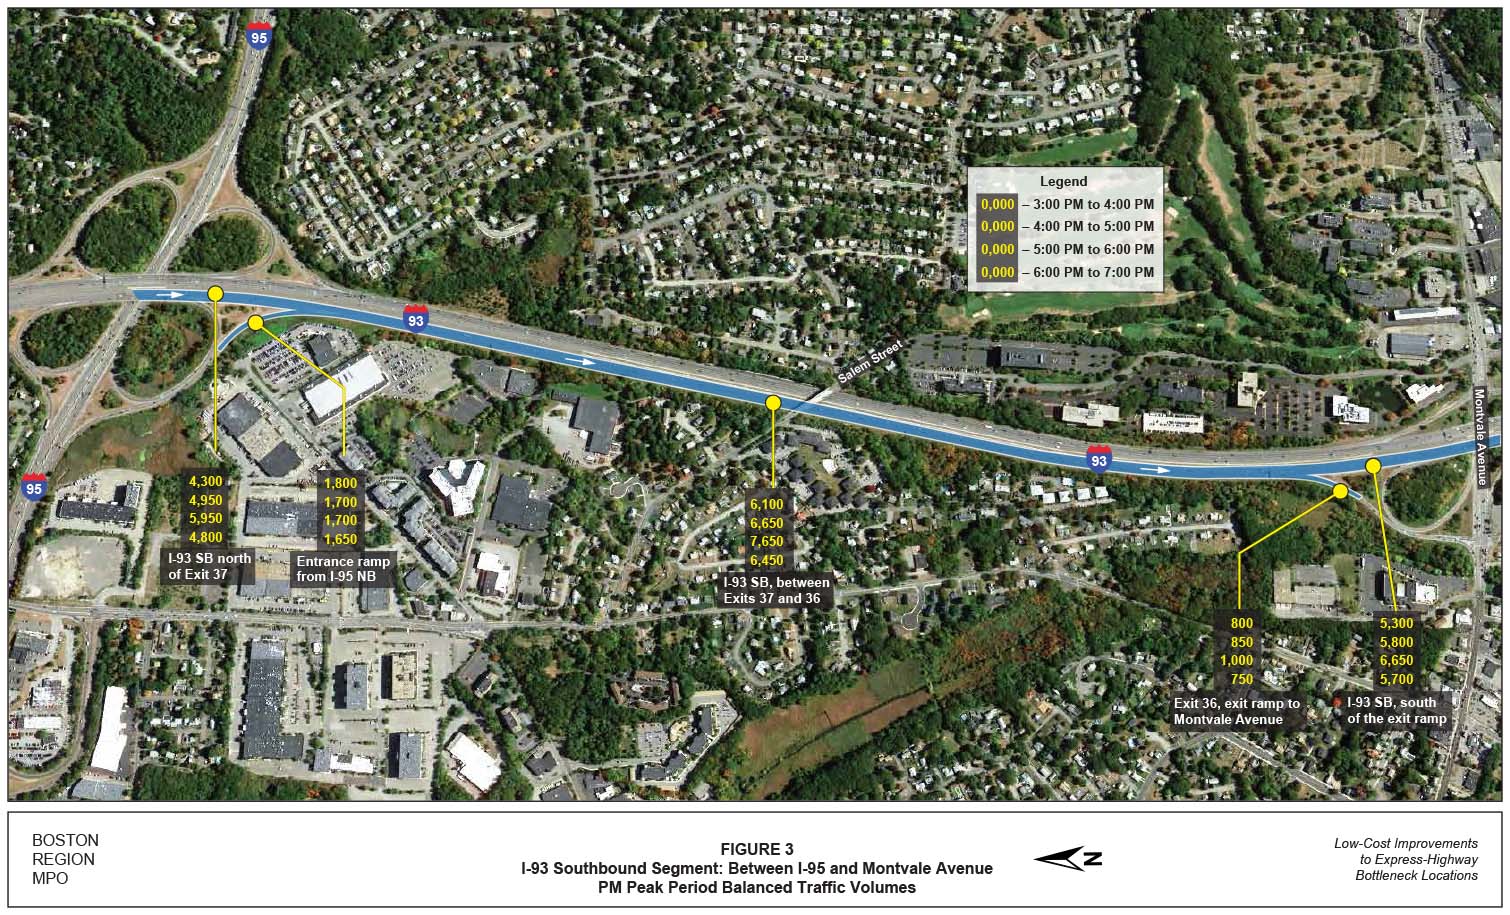 FIGURE 3. Aerial-view map showing the PM peak-period balanced traffic volumes for the I-93 southbound segment between I-95 and Montvale Avenue